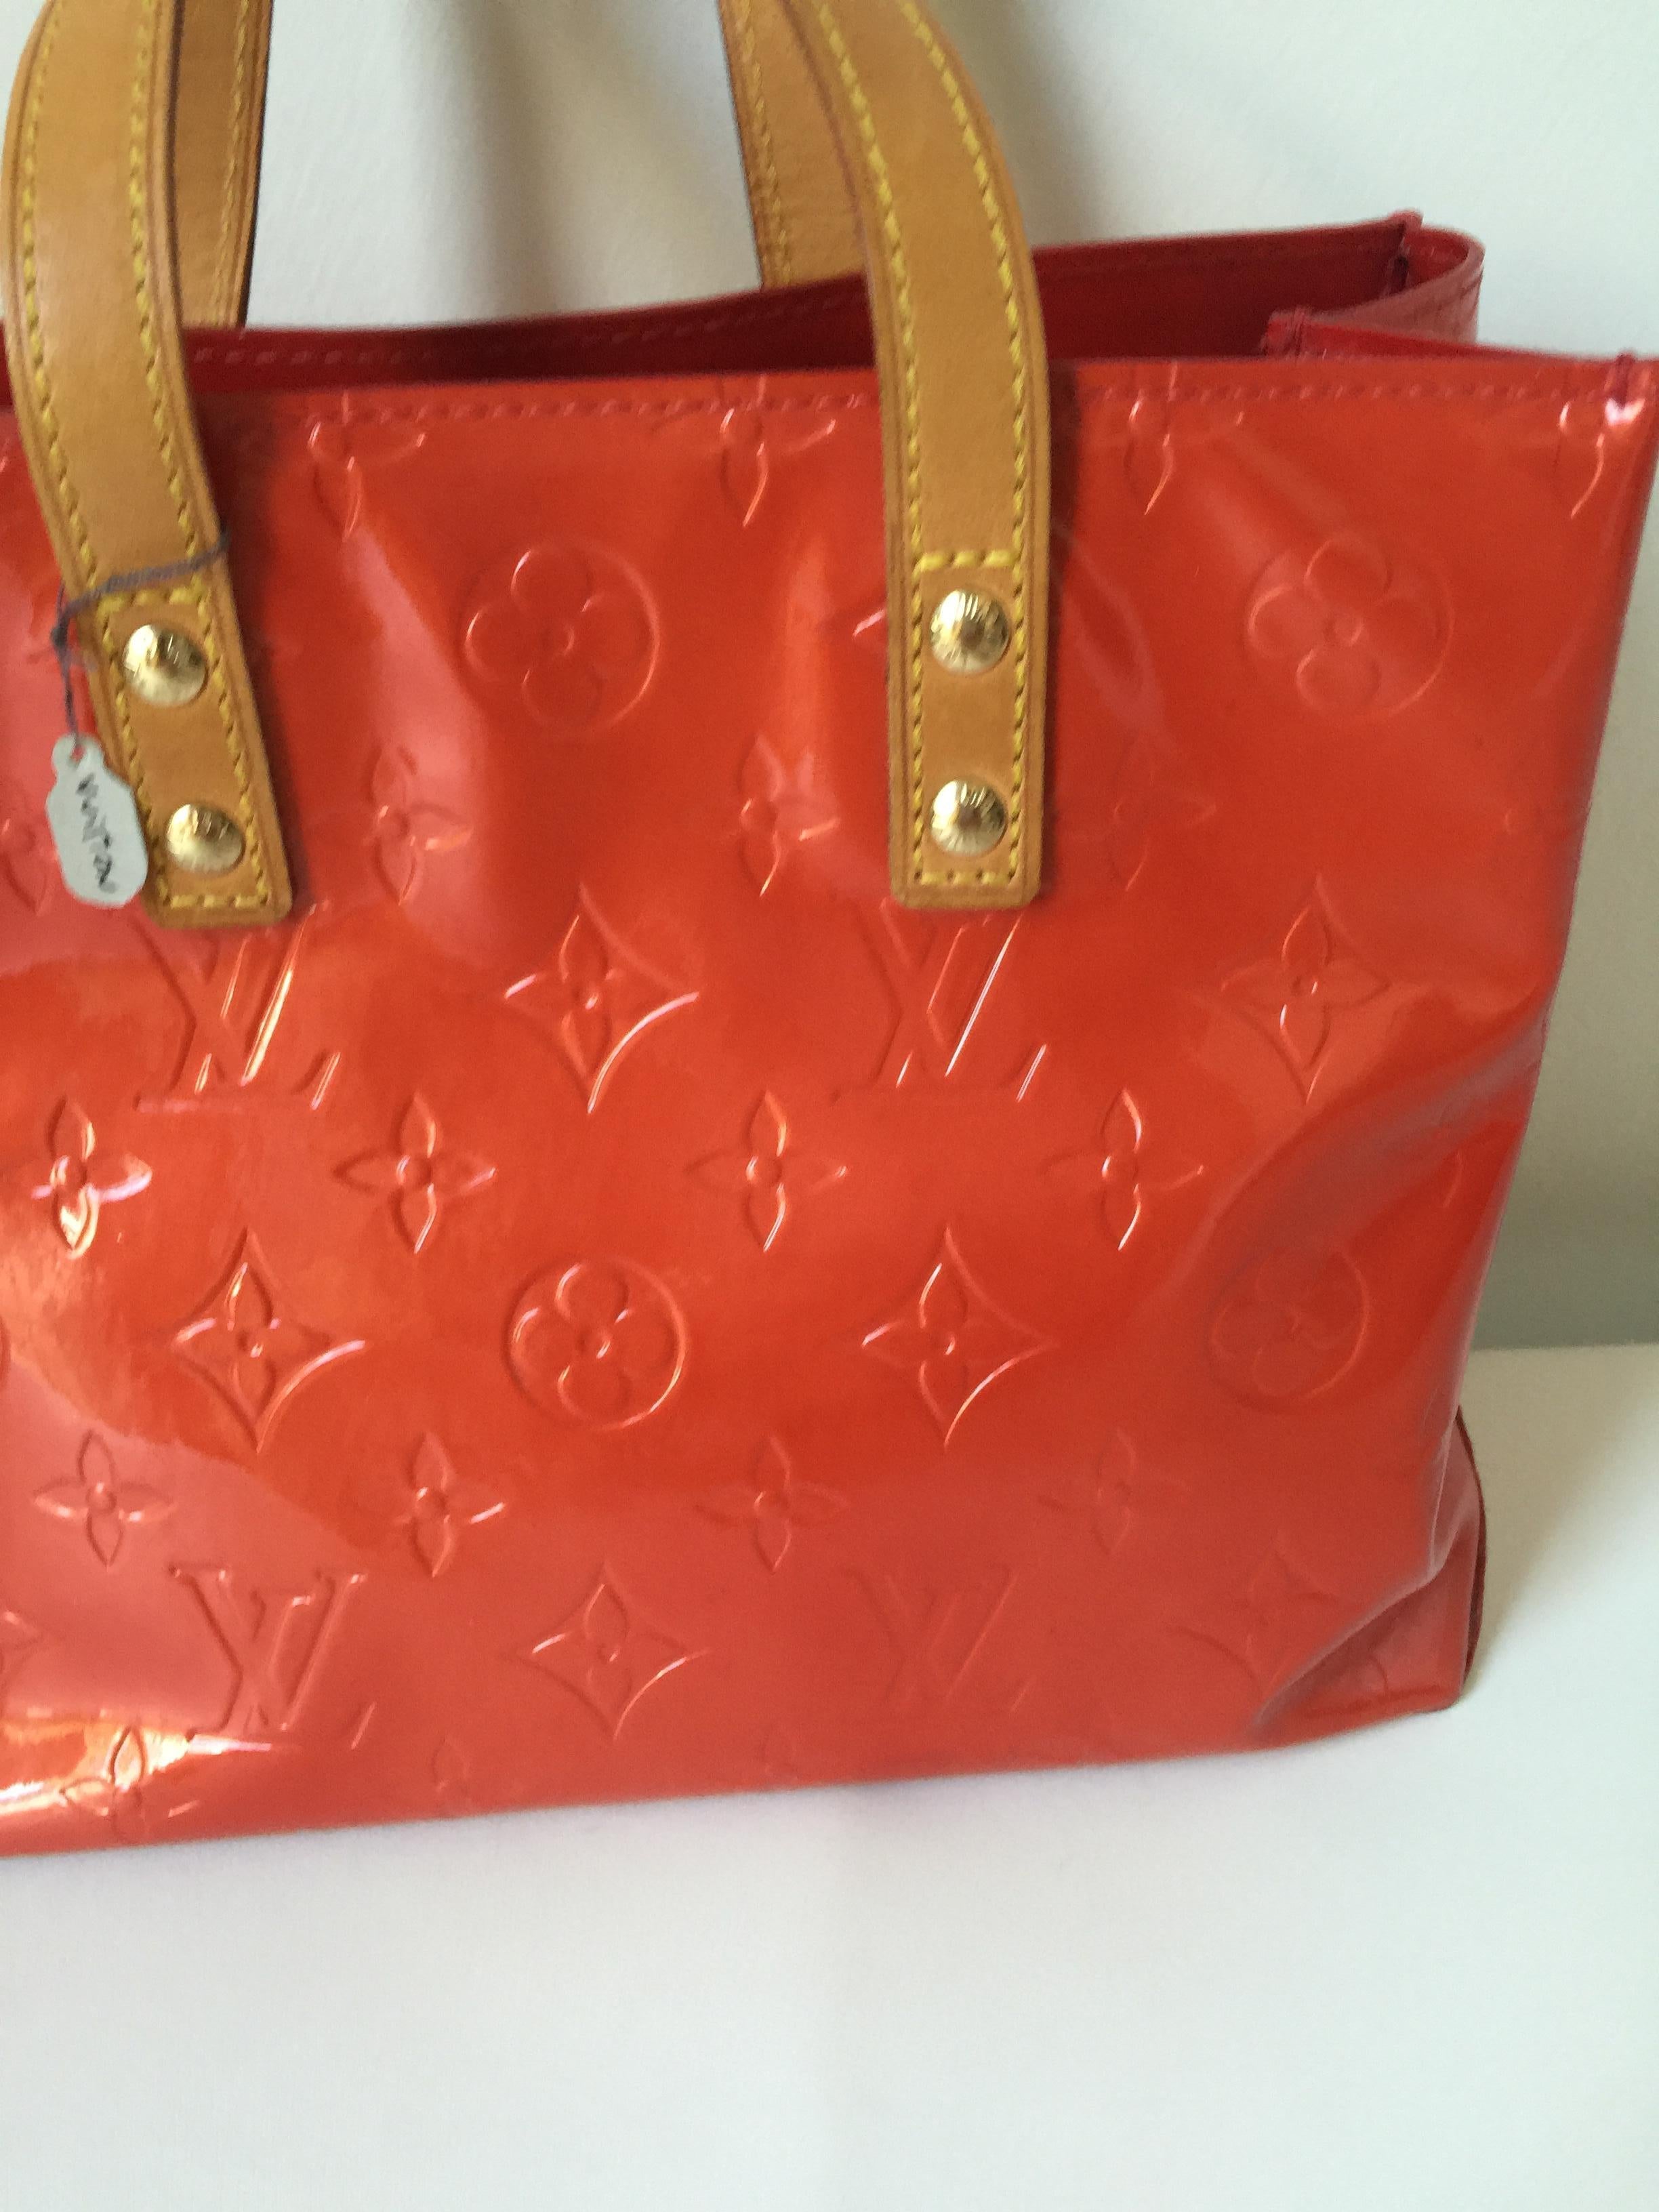  Monogram red patent Louis Vuitton mini tote with tan top handles.
Can be used as a special occasion bag
Dust bag